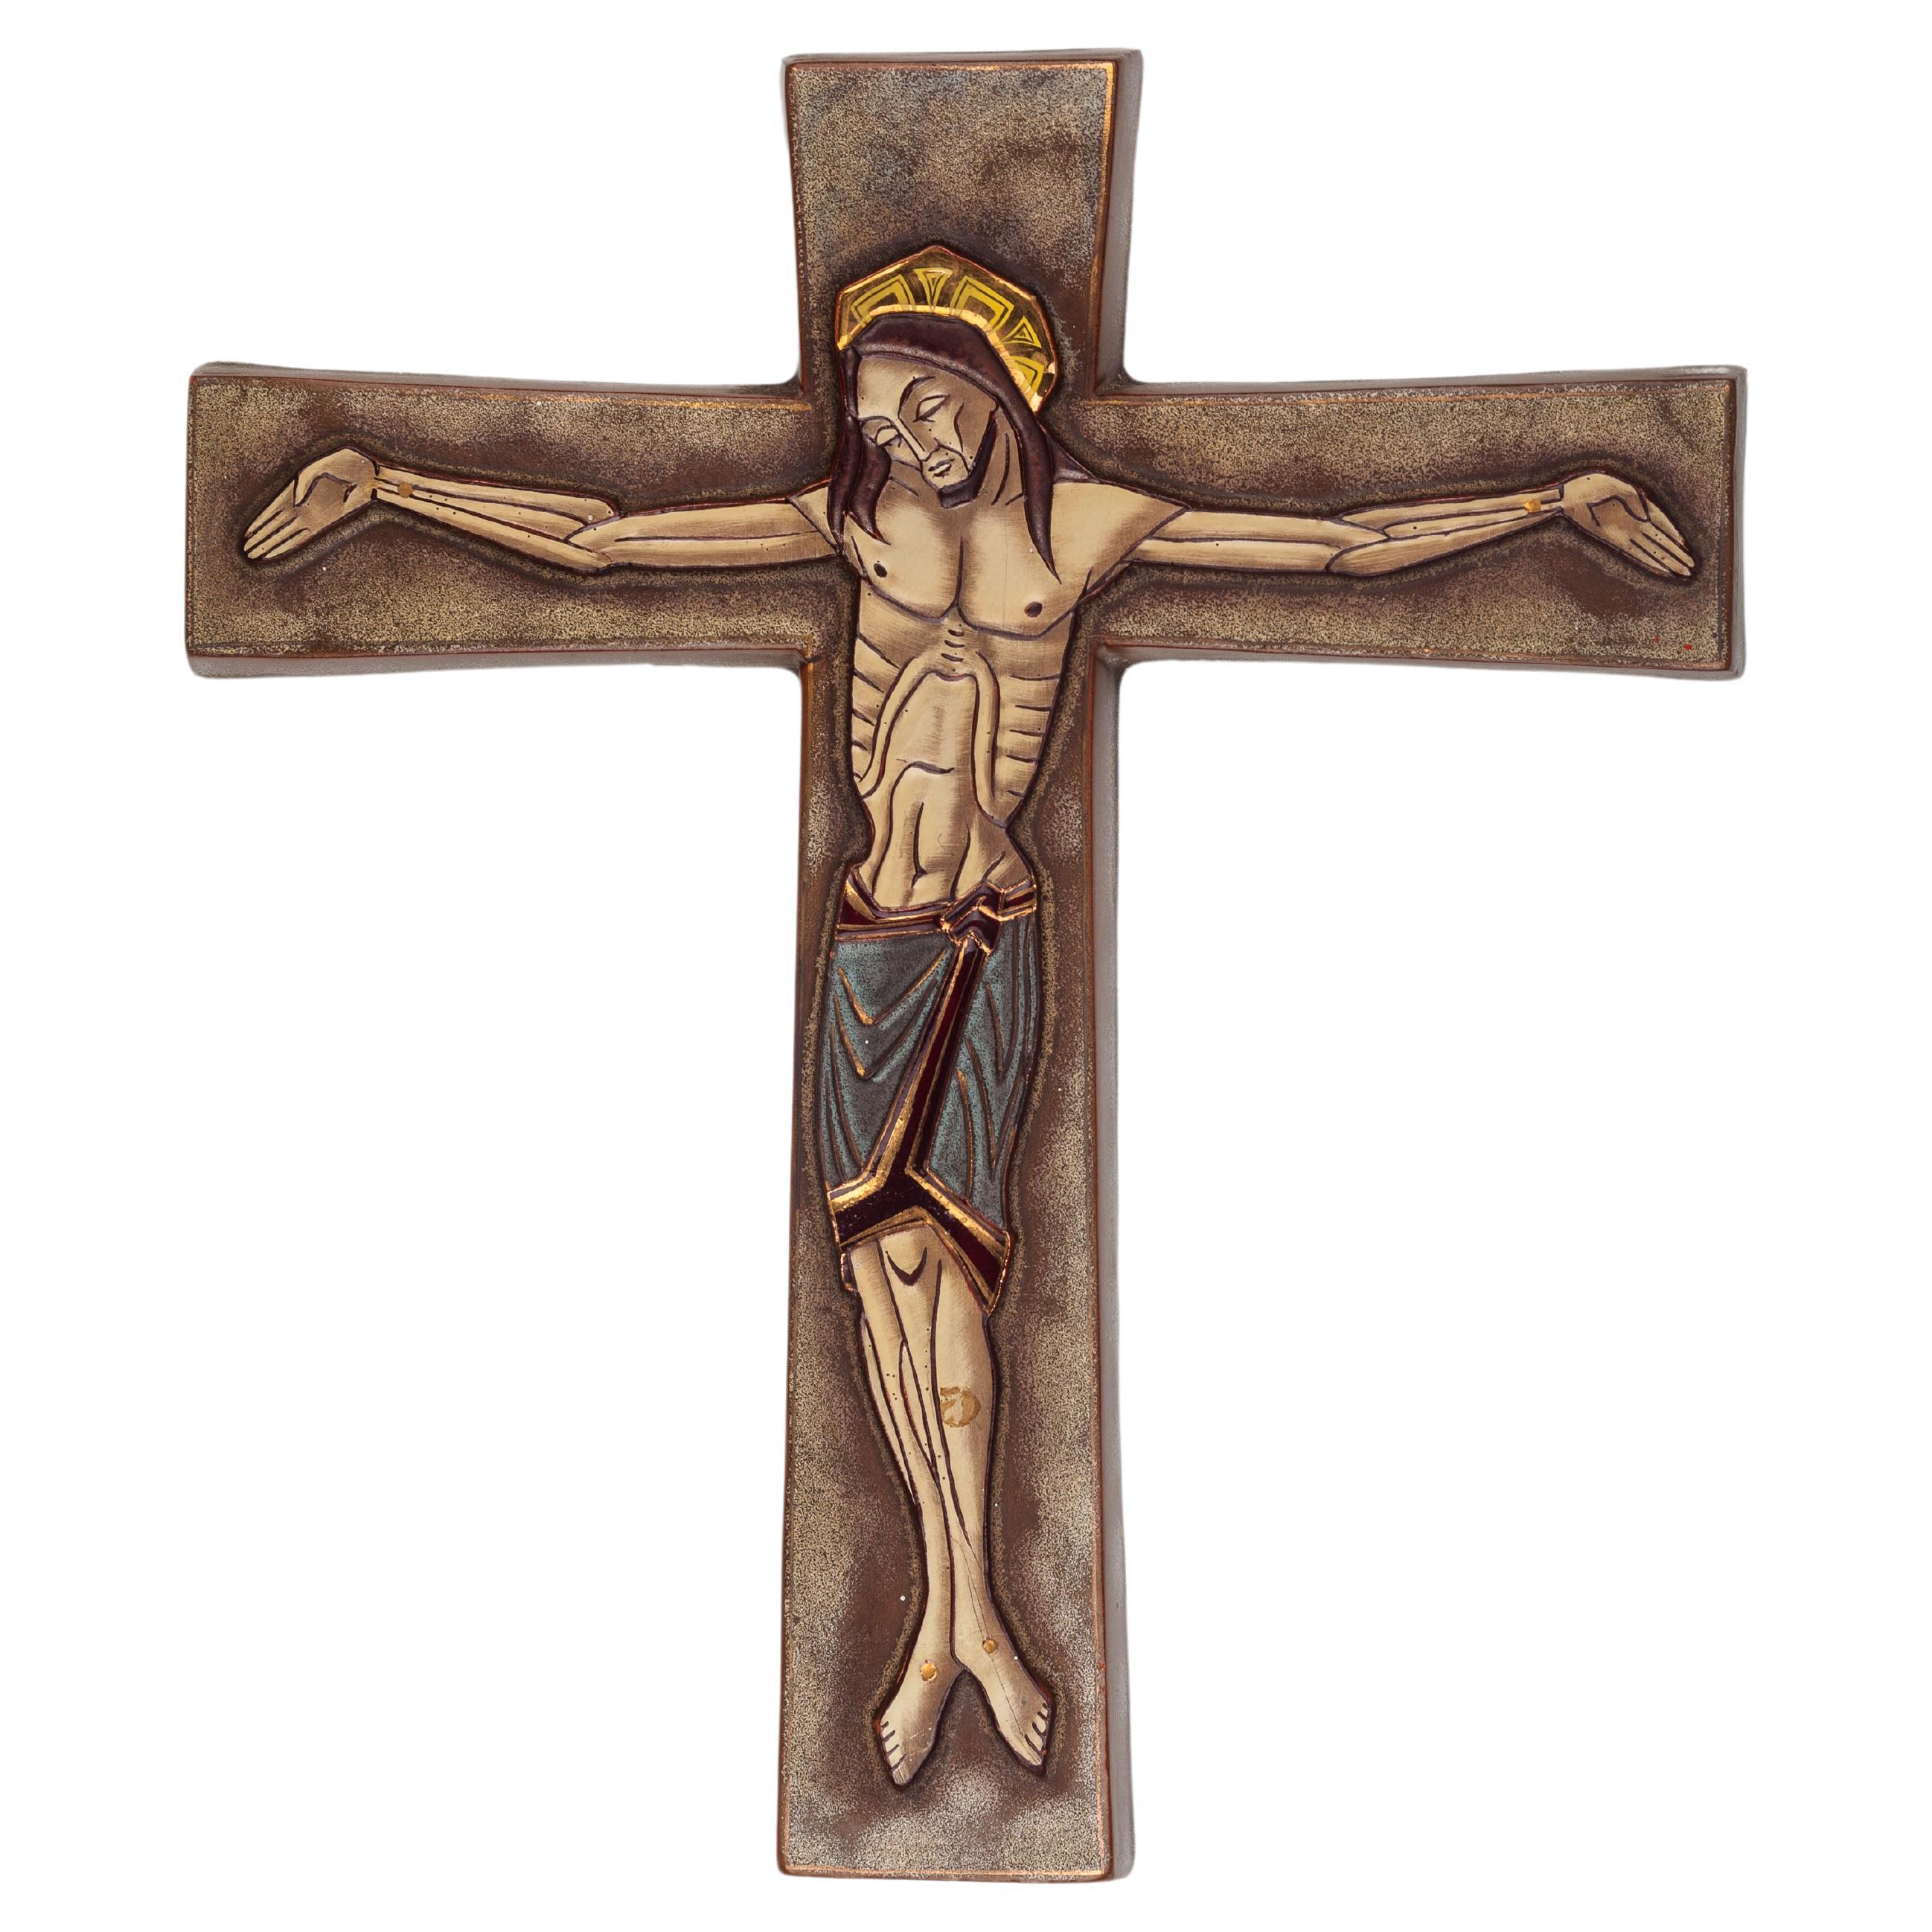 Modernist Wall Cross, Jesus, Gold accents, European Ceramic For Sale